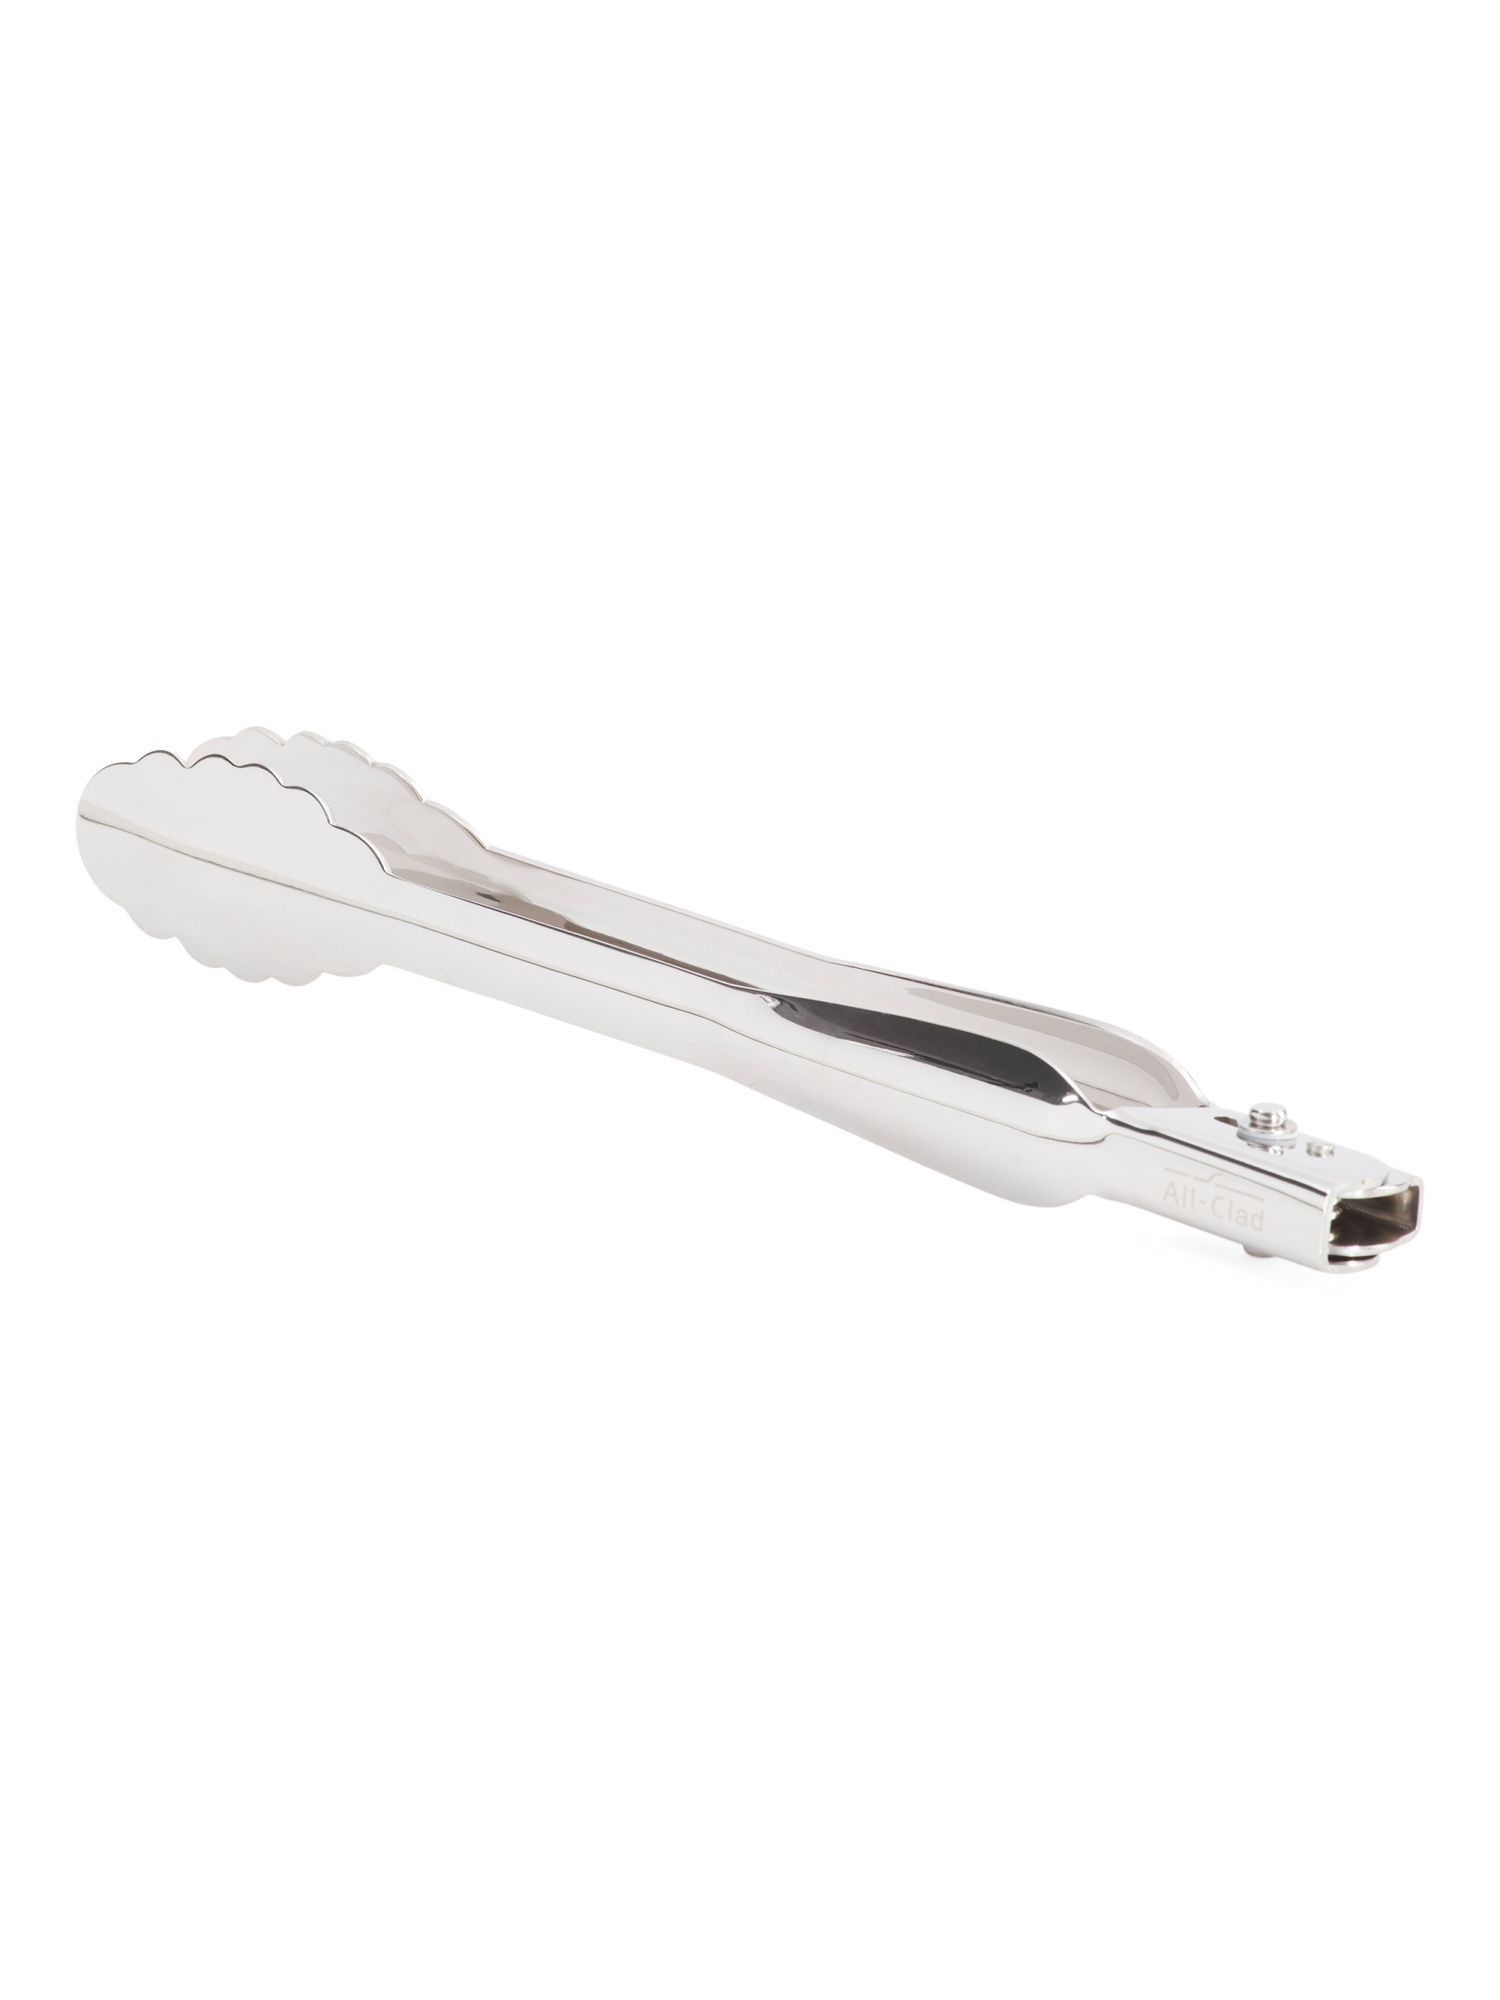 12in Stainless Steel Locking Tongs Slightly Blemished | Marshalls